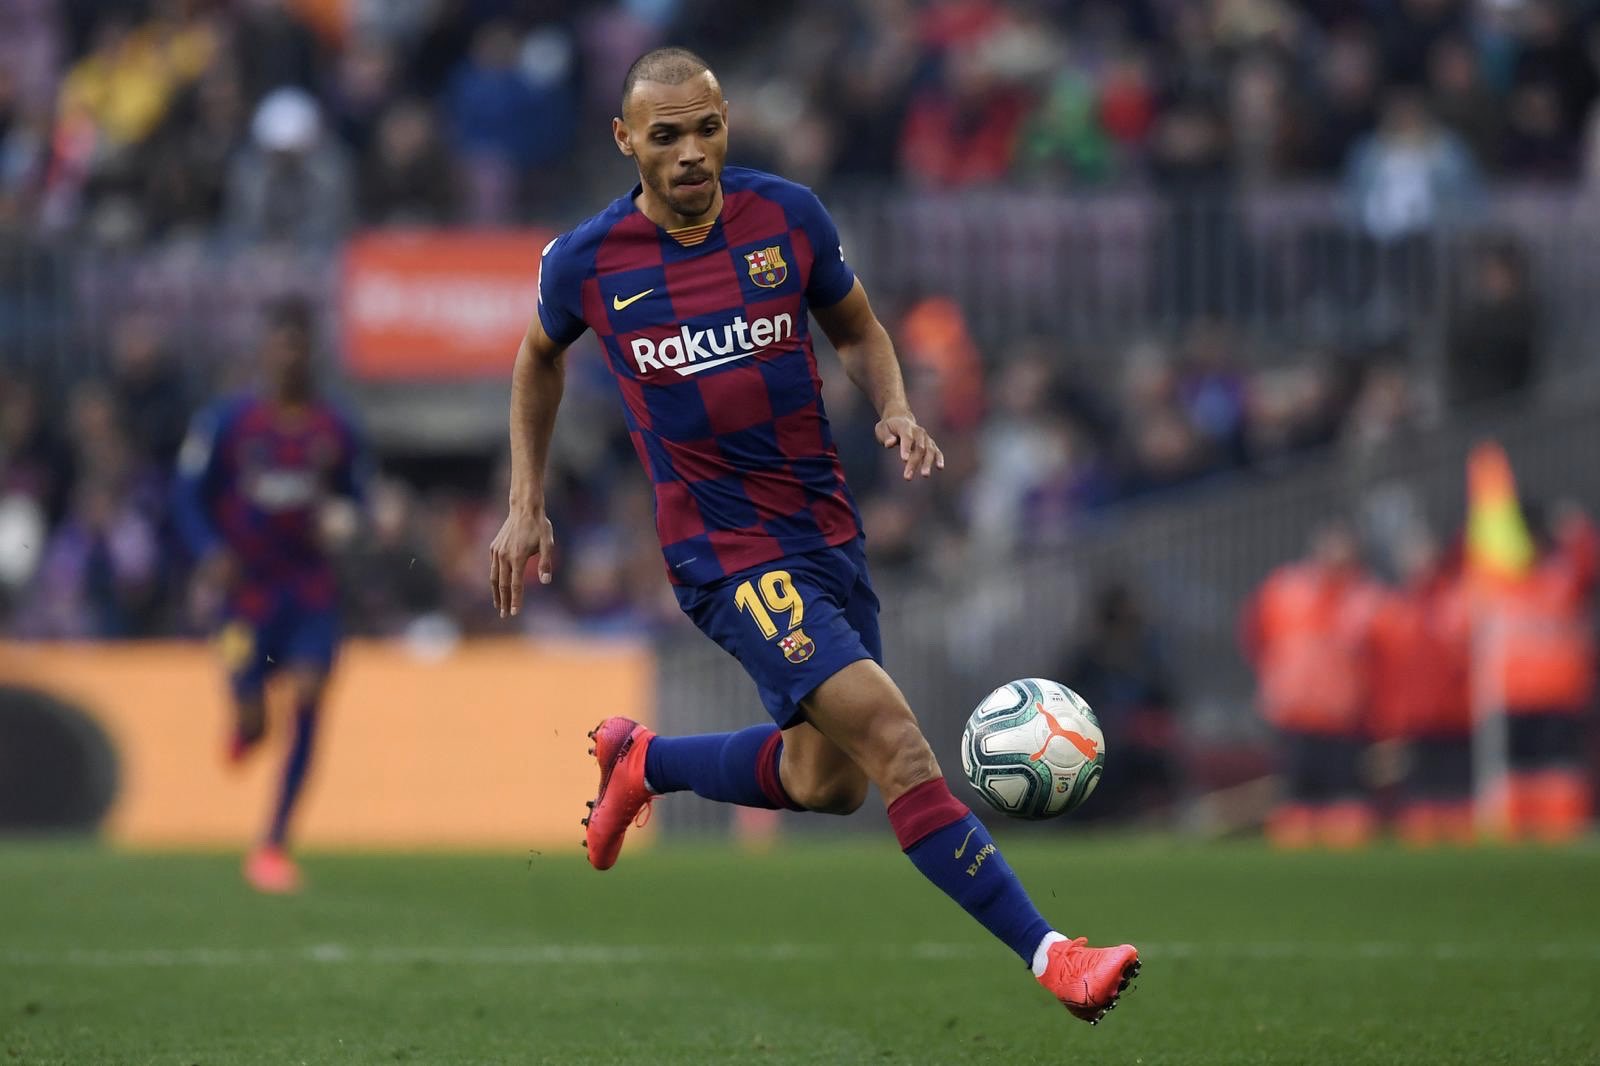 If football is a religion then Lionel Messi is its God, proclaims Martin Braithwaite